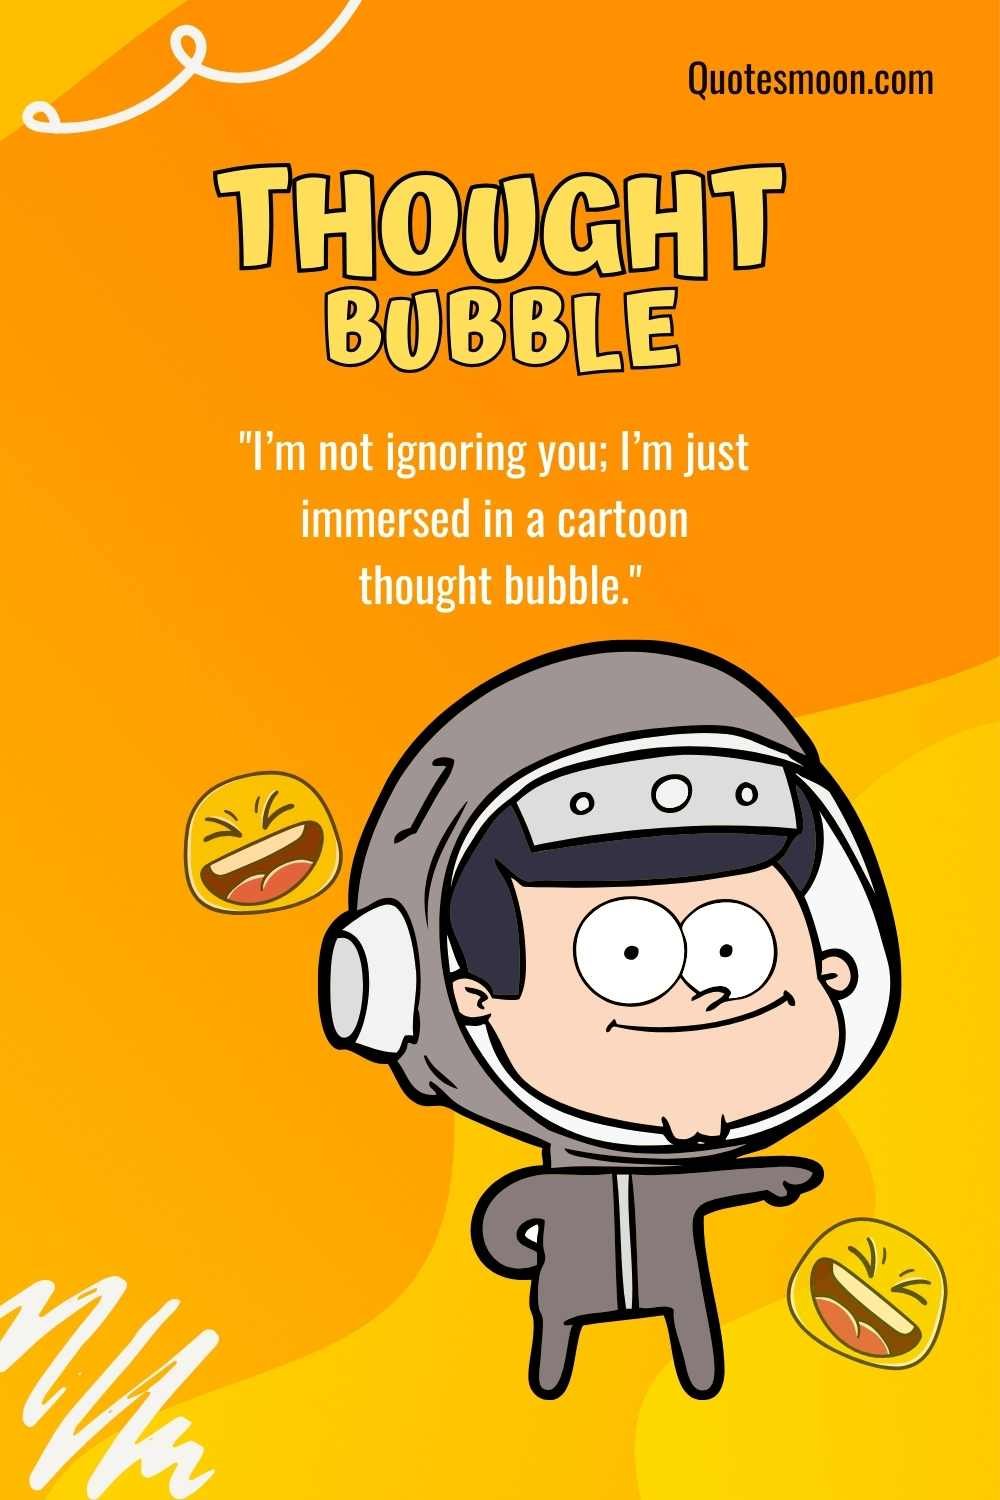 funny Cartoon Quotes from Animators & Cartoonists with images